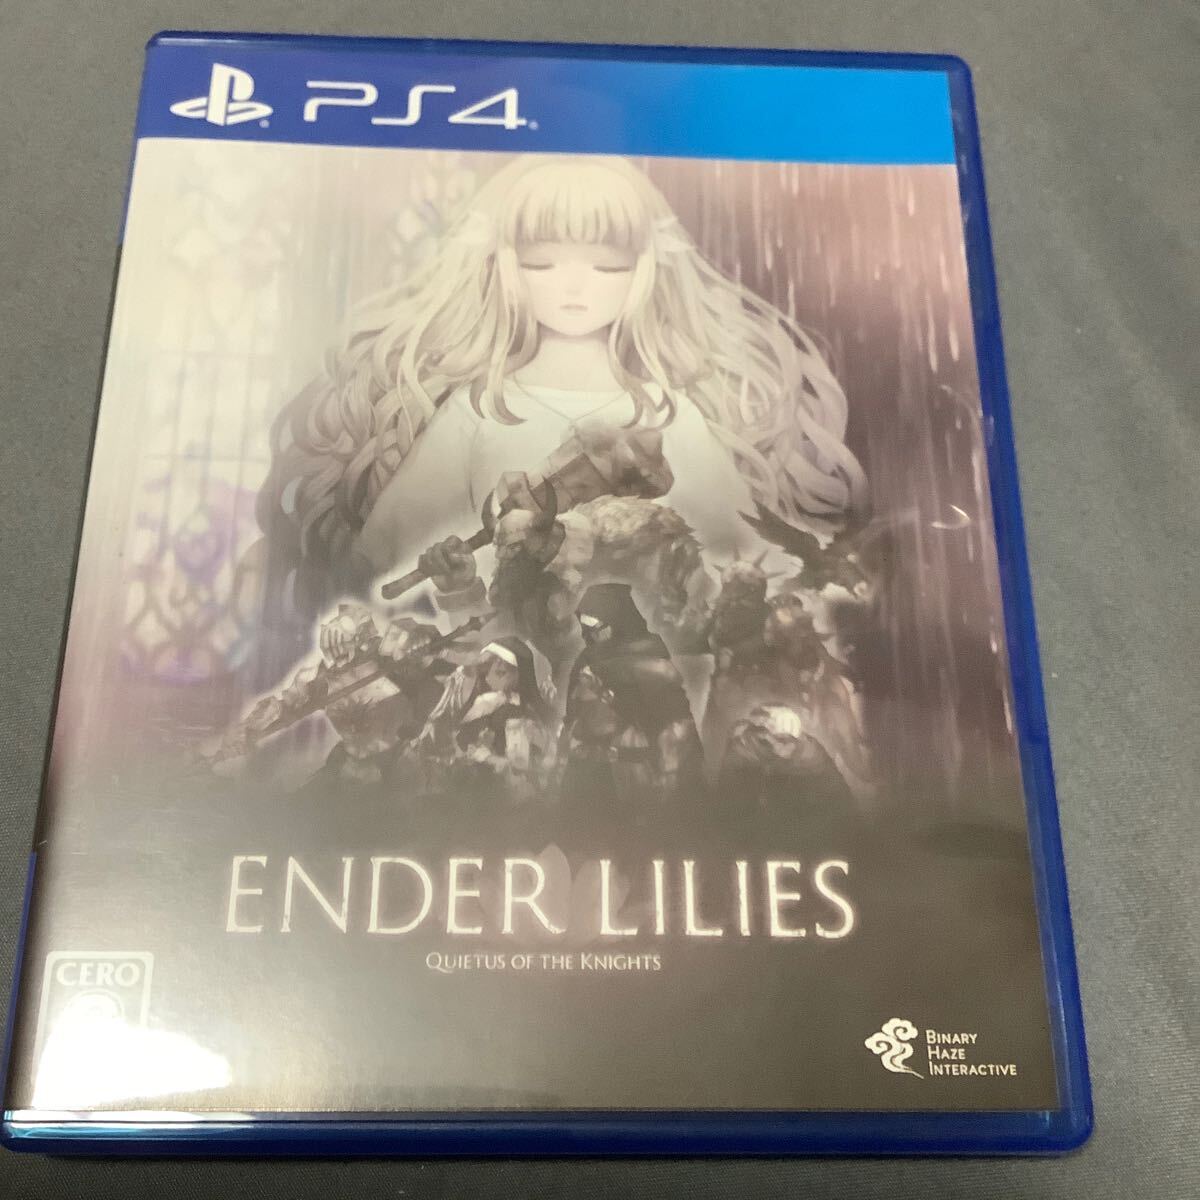 PS4ソフト ENDER LILIES: Quietus of the Knights 開封済み未使用品の画像1